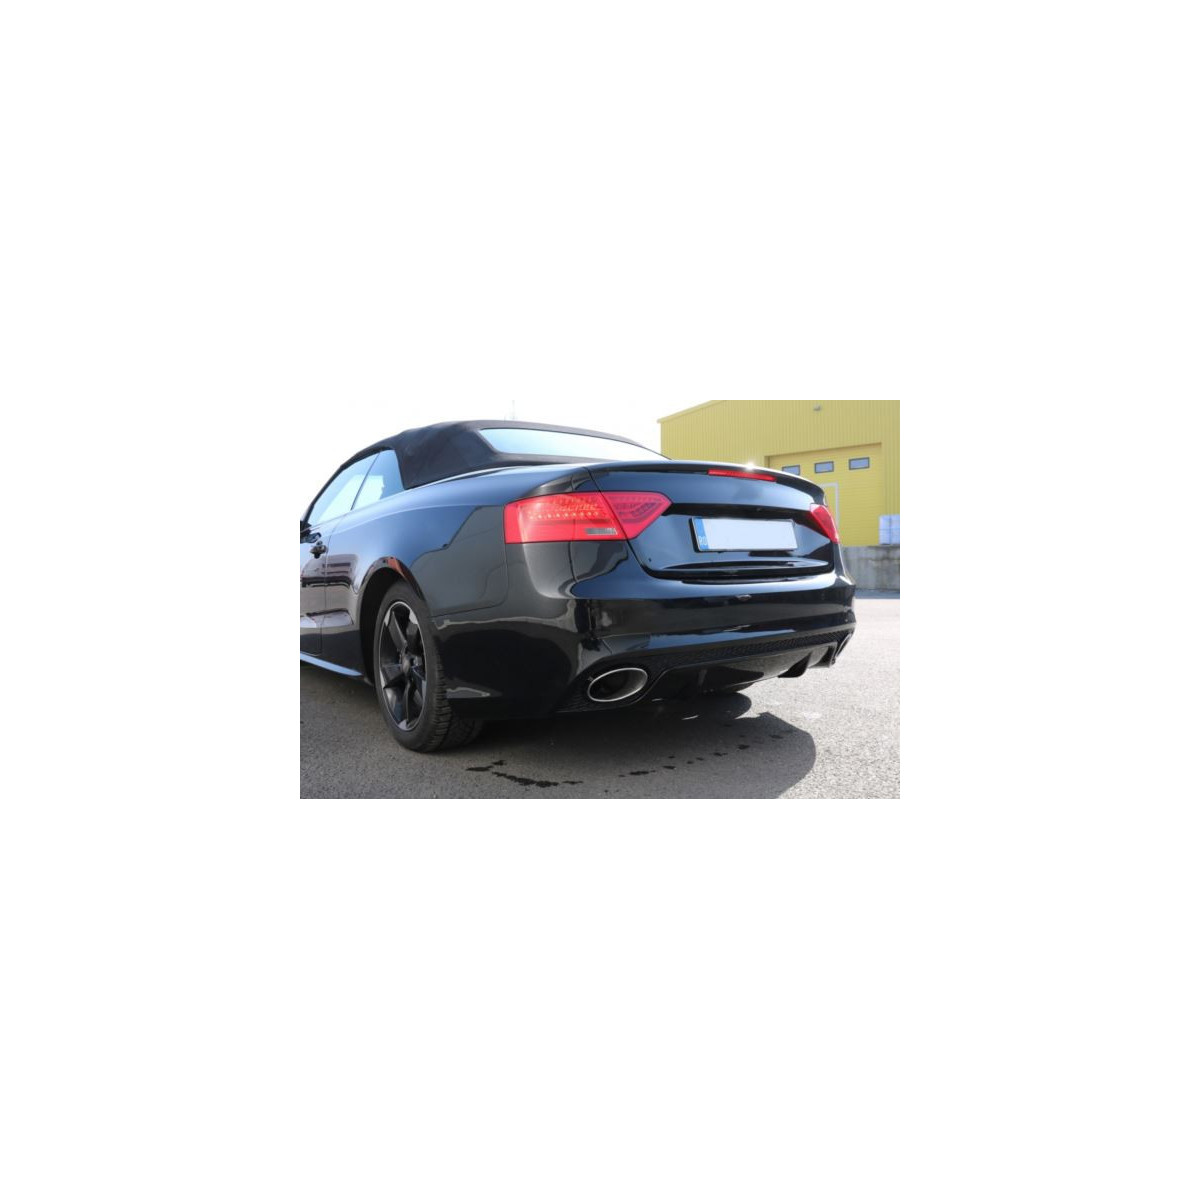 TYLNT ZDERZAK AUDI A5 S5 8T COUPE CABRIO 07-12 RS5